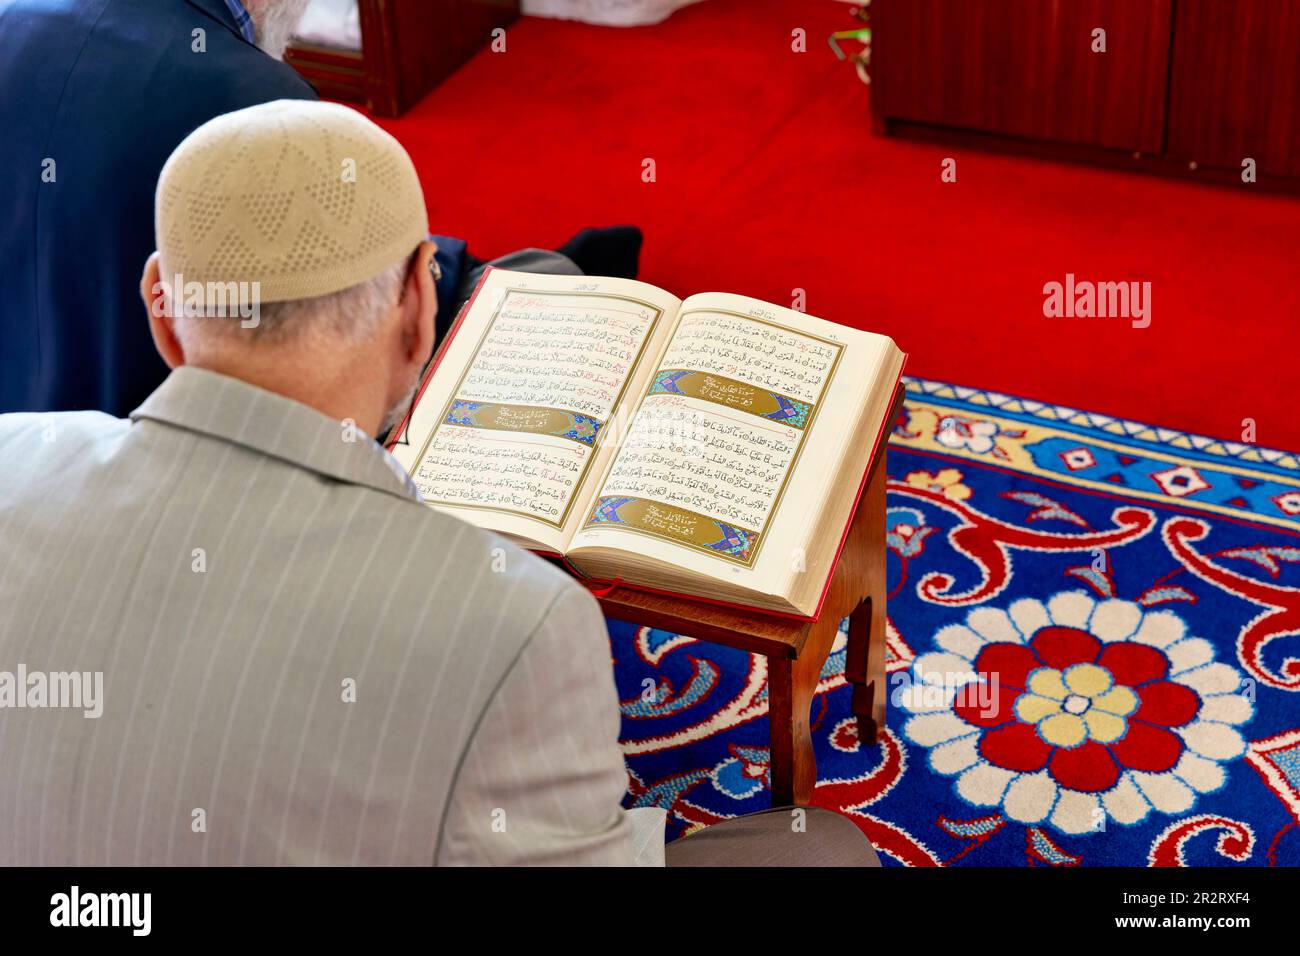 Istanbul Turkey. Muslim believer praying and reading Koran in the Fatih Mosque Stock Photo